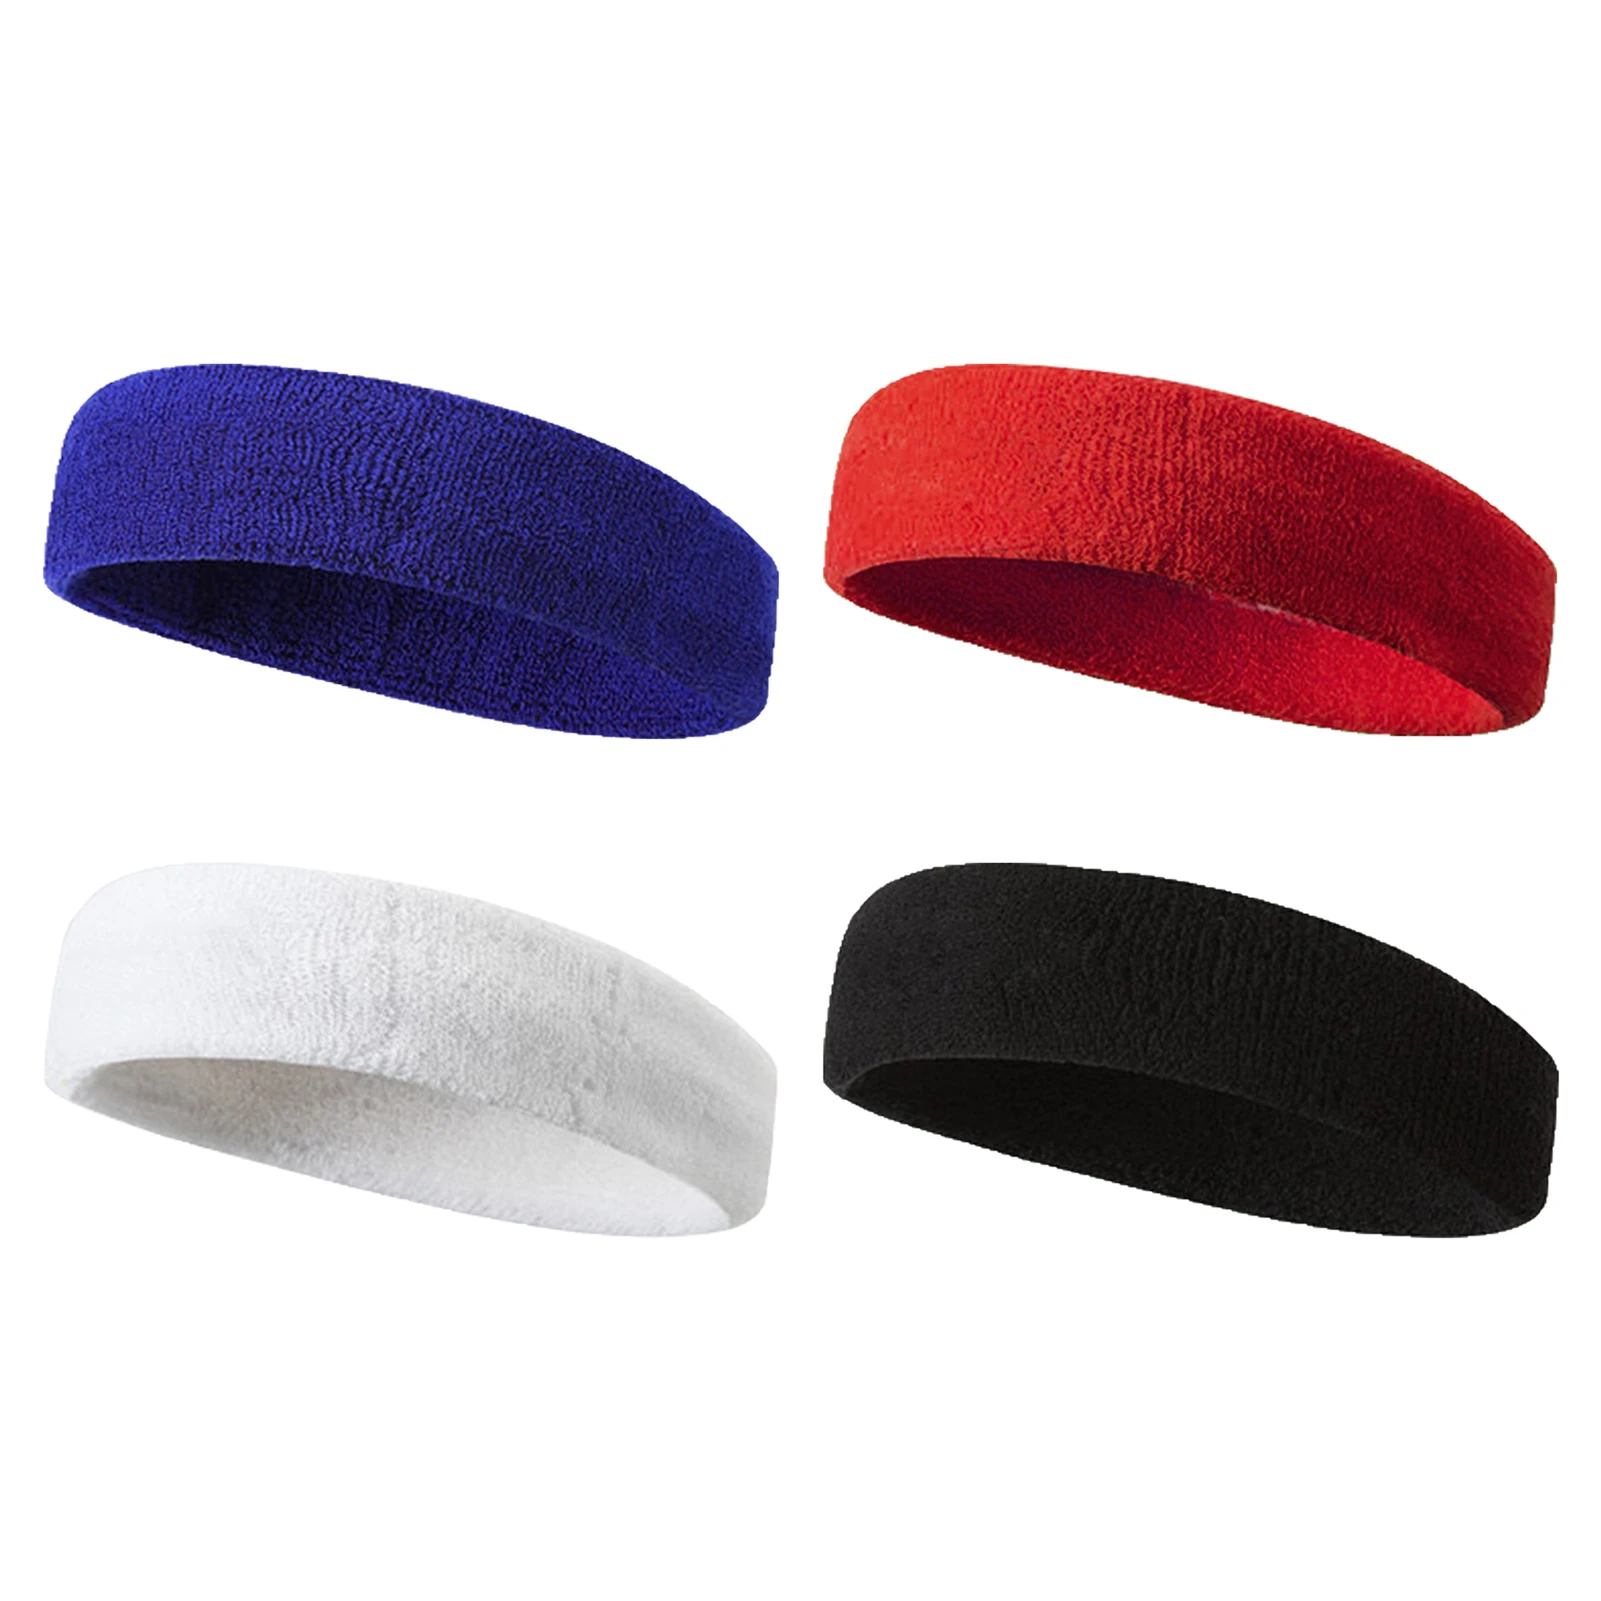 

4pcs Sports Headband Accessories Moisture Wicking Men Women Soft Stretchy Sweat Absorbing Running Yoga Polyester Outdoor Cycling